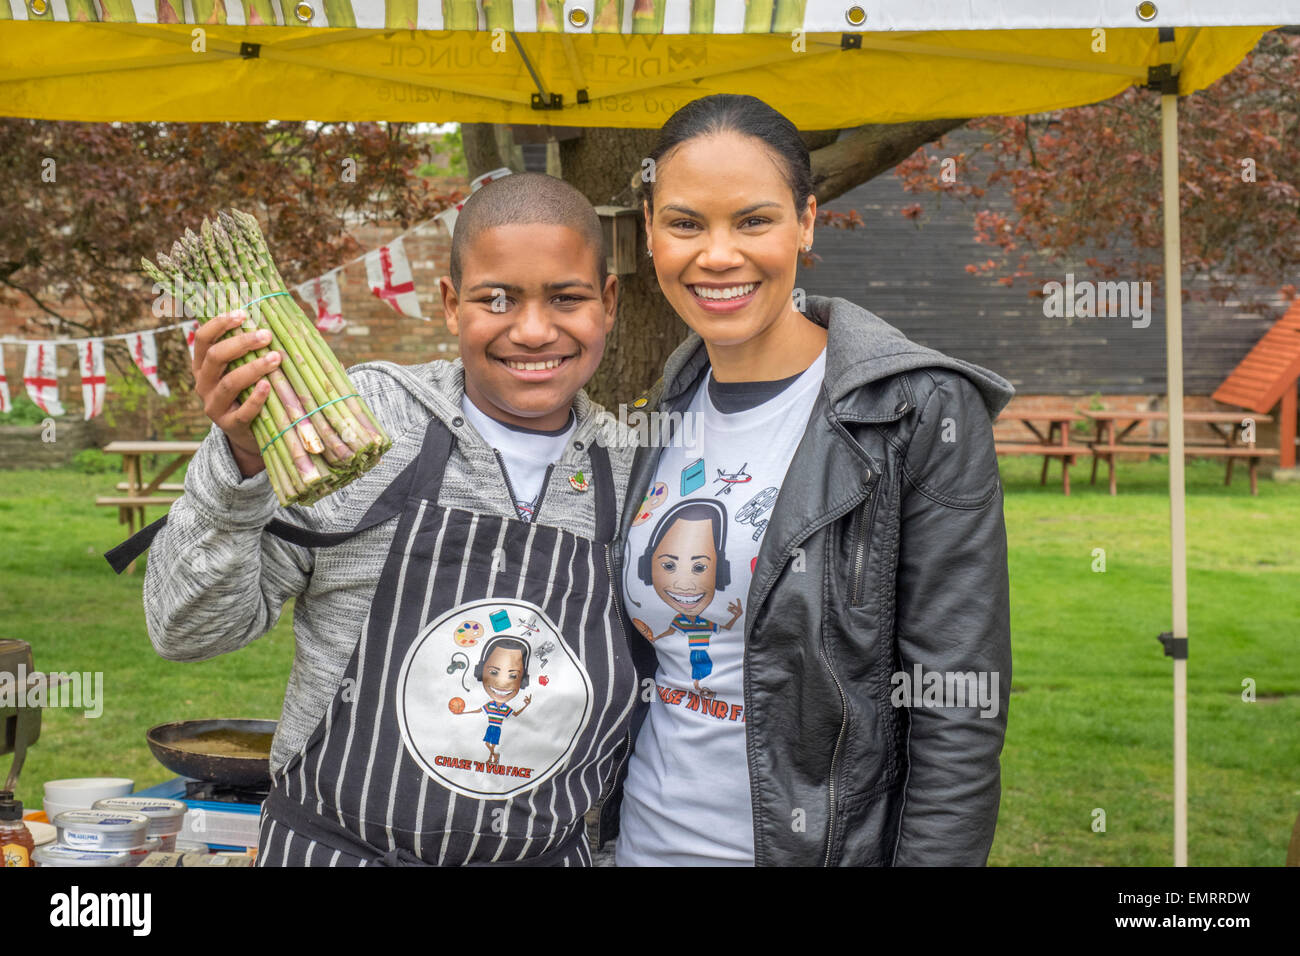 Evesham, UK. 23rd Apr, 2015. Californian celebrity chef Chase Bailey  and his mother Mary at the UK Asparagus Festival in the Vale of Evesham, Worcestershire, UK on Thursday  23rd April 2015 Credit:  Ian Thwaites/Alamy Live News Stock Photo